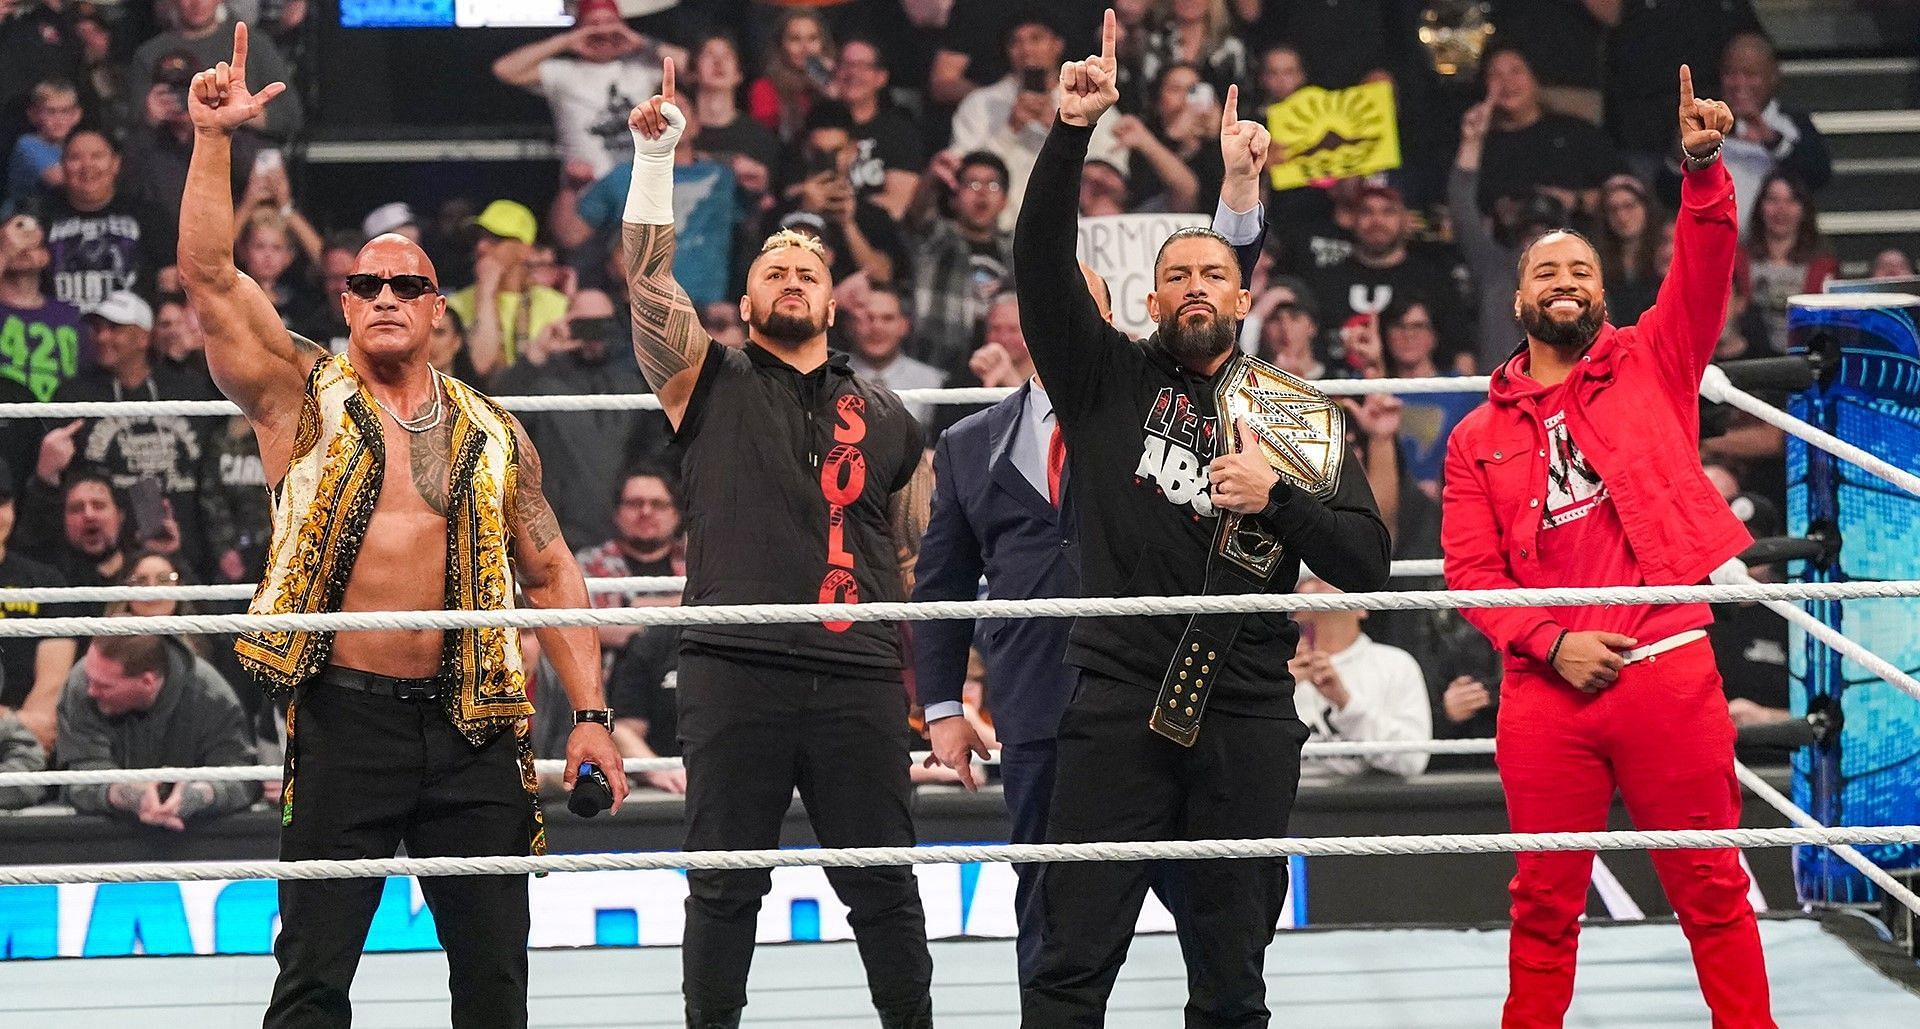 The Rock joined The Bloodline on WWE SmackDown last week